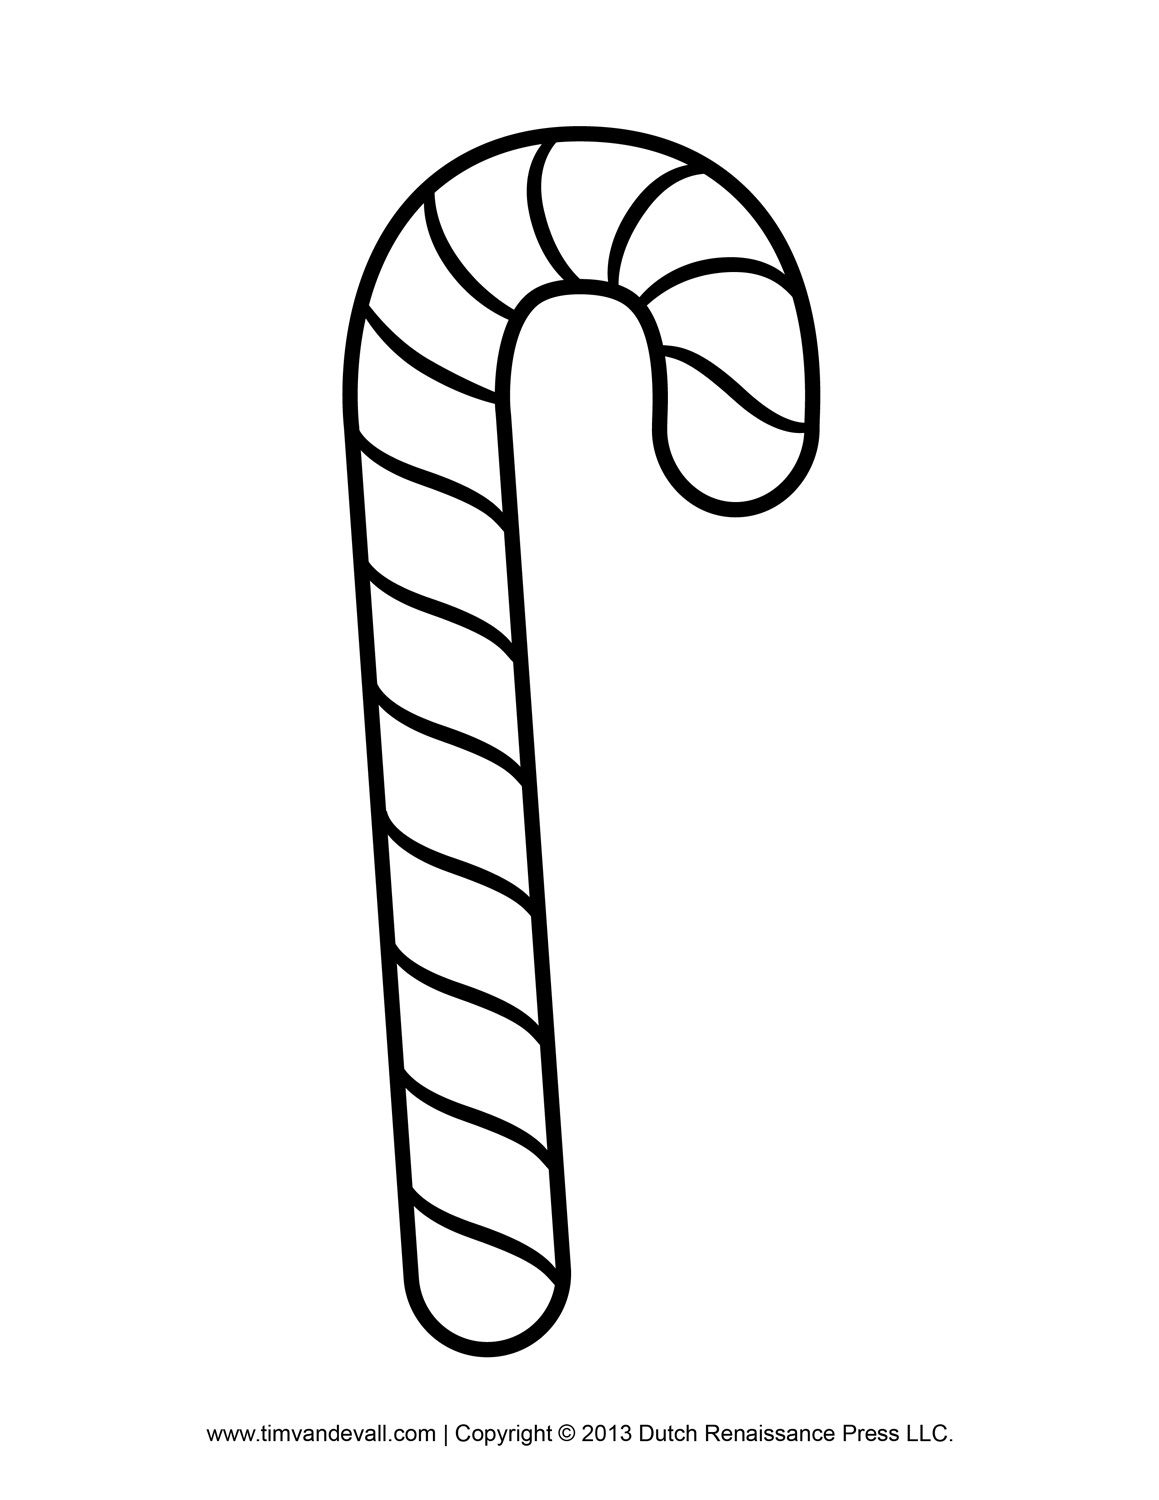 Candy Clip Art Black And White Candy Cane Coloring Pages | Christmas - Free Candy Cane Template Printable